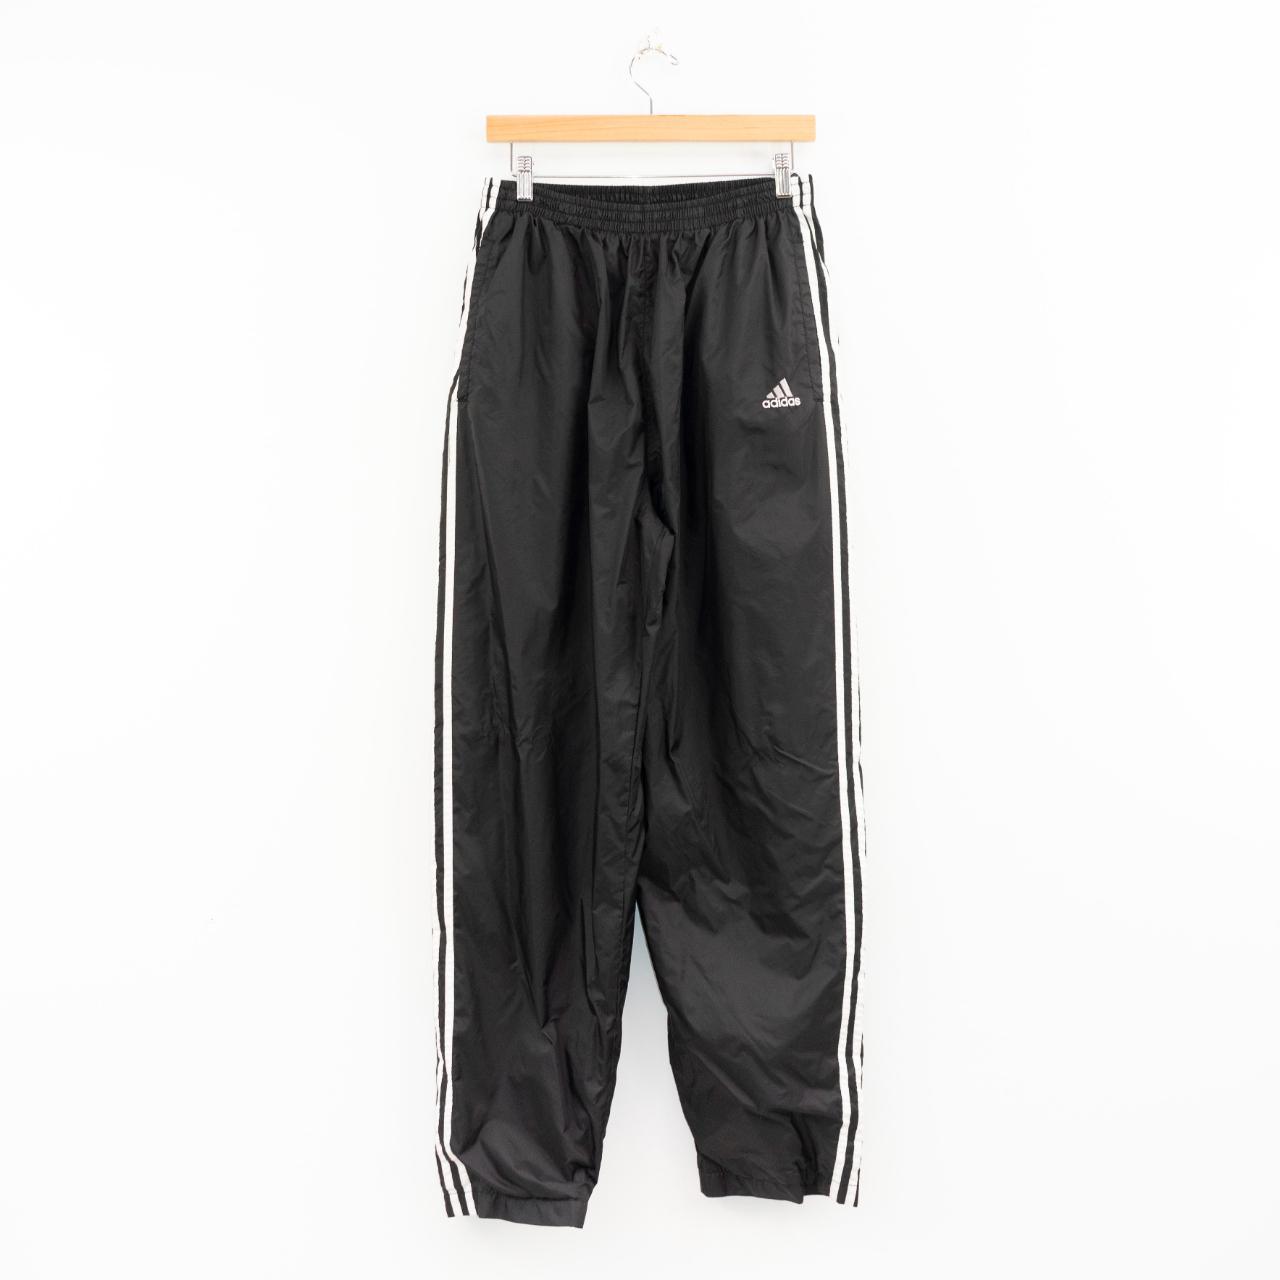 Product Image 1 - Vintage 90s Adidas Spell Out